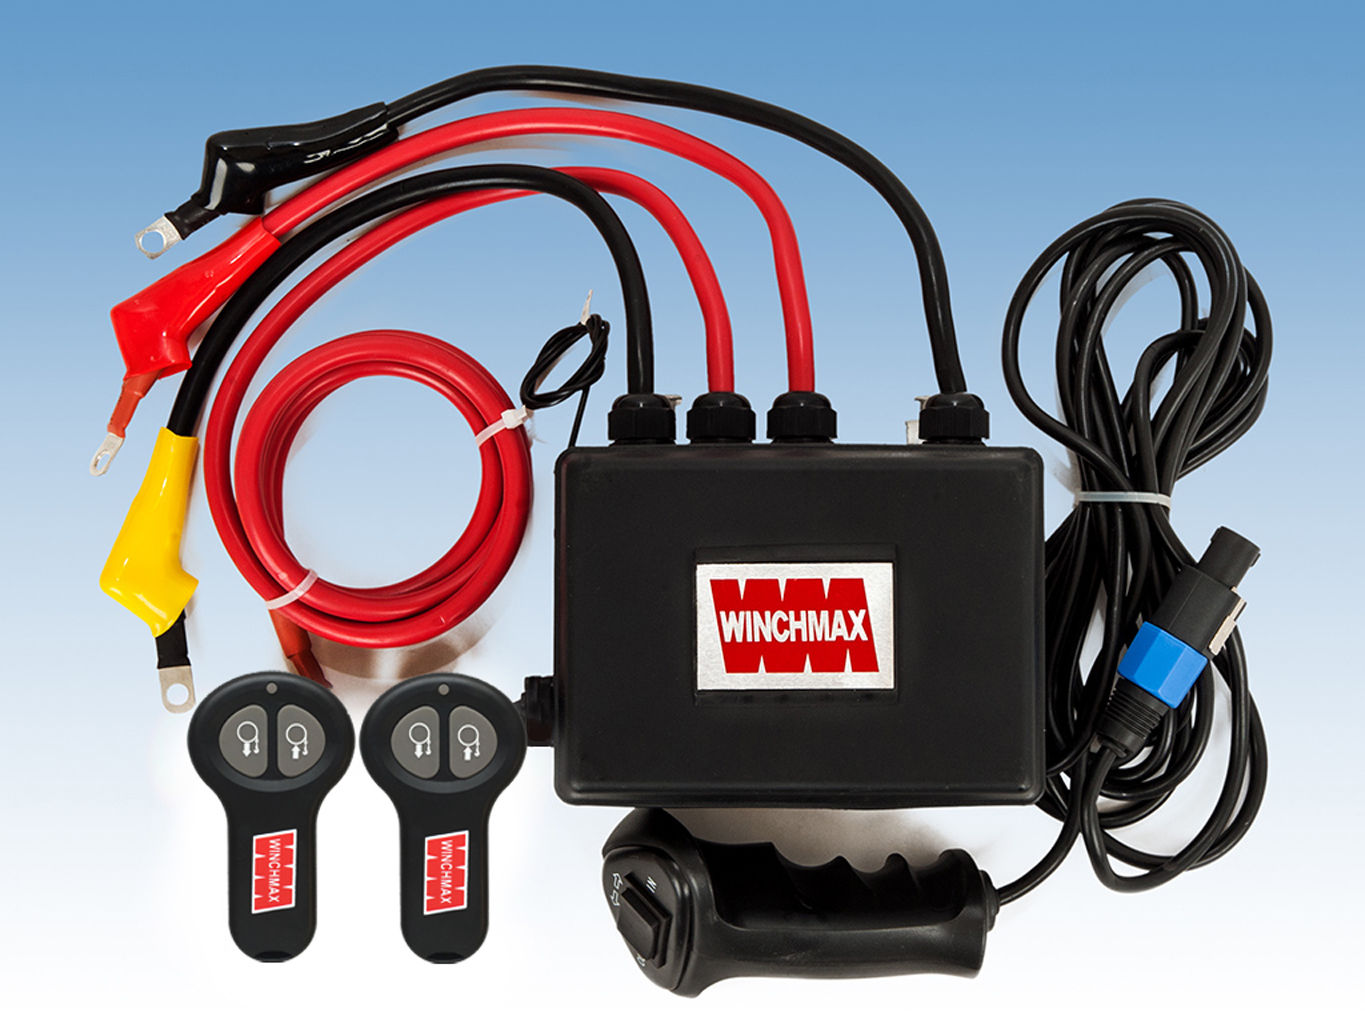 Solenoid control box for winches up to 5000lb with wireless controls 